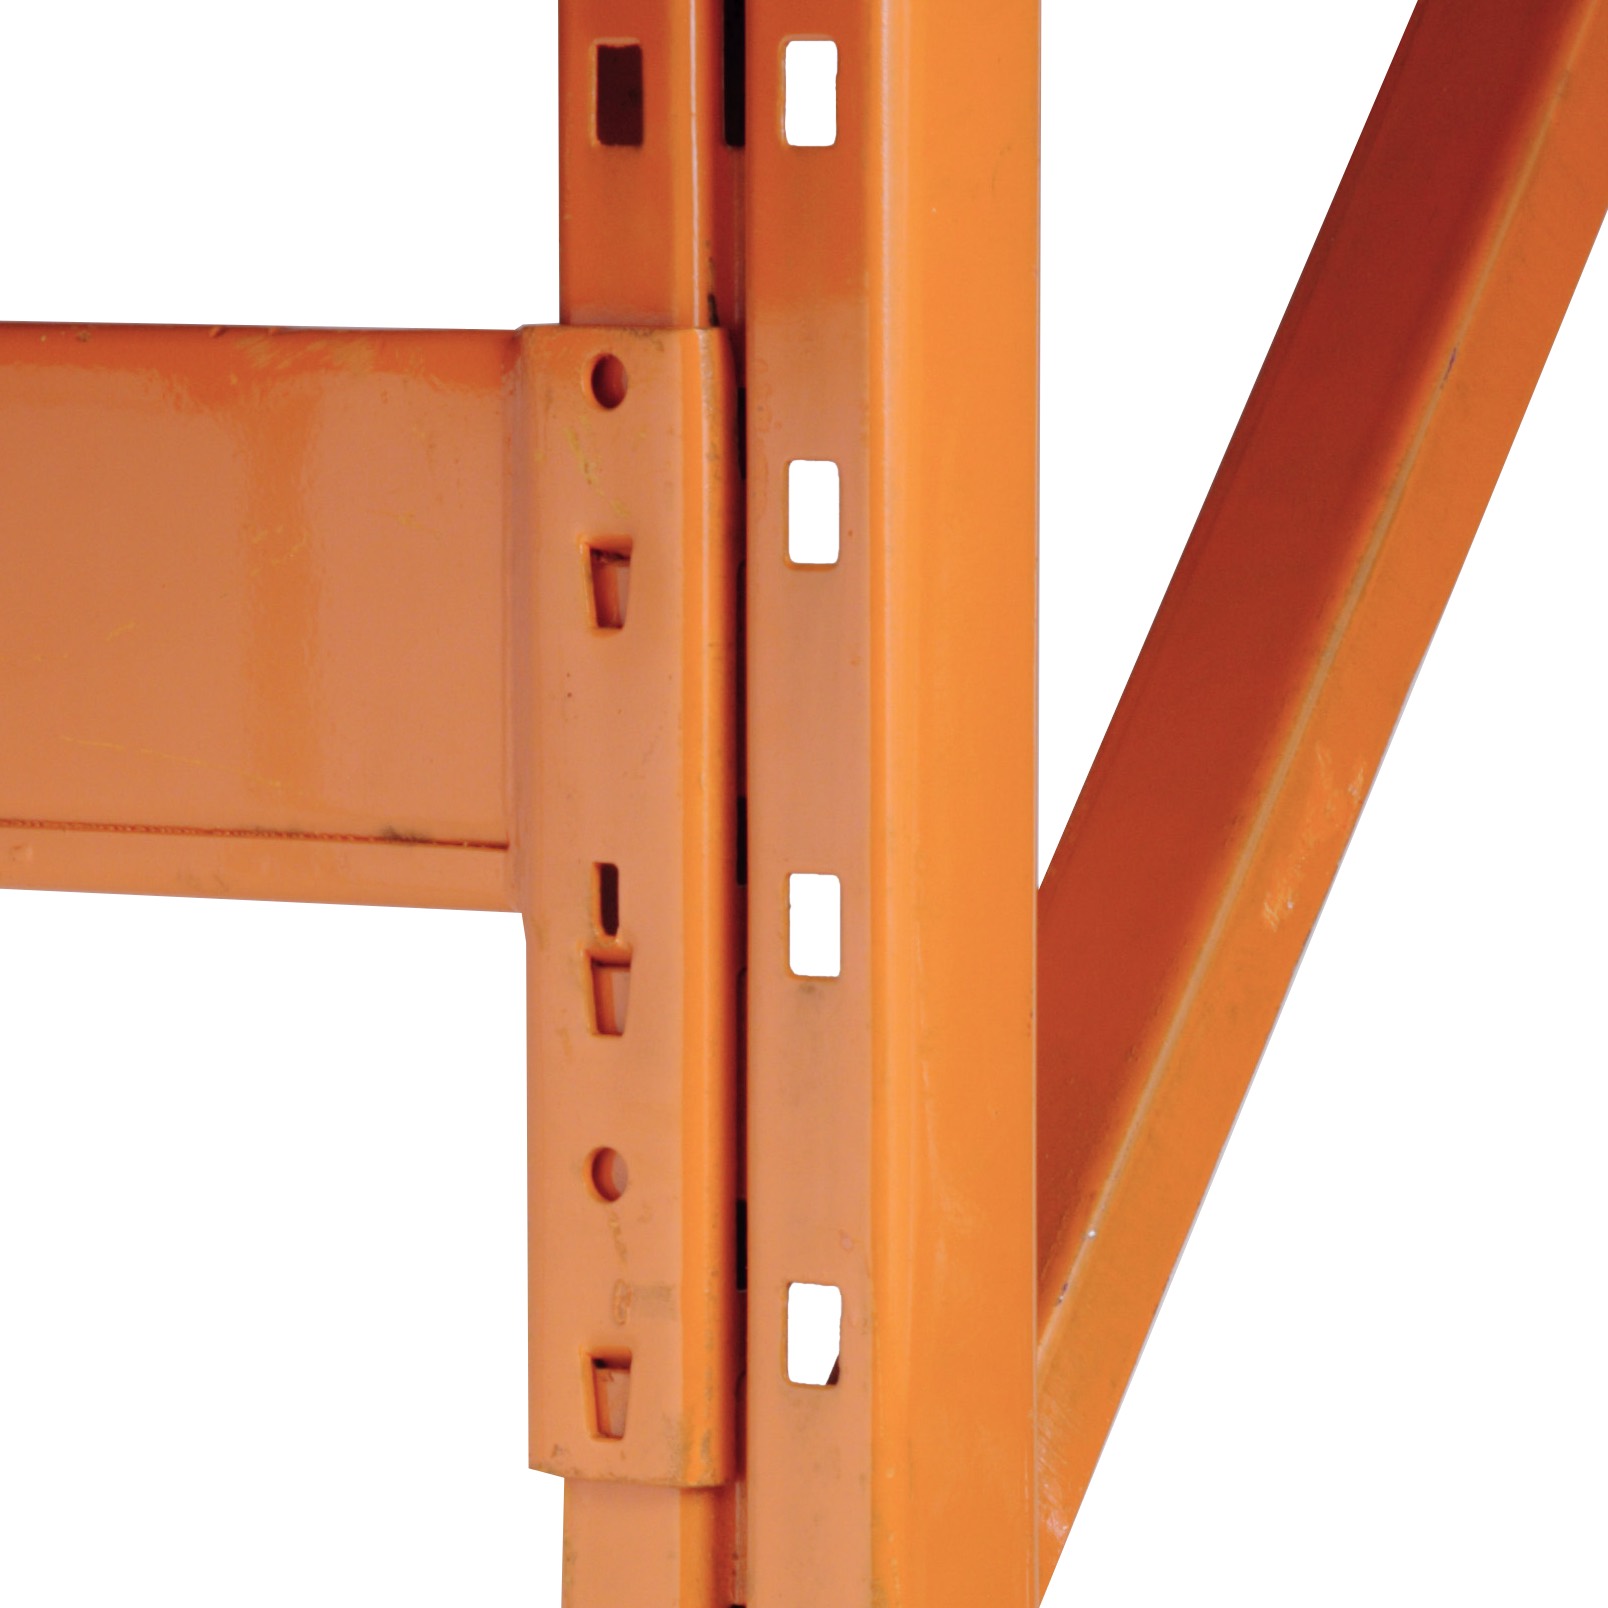 RediRack beam connected to upright frame